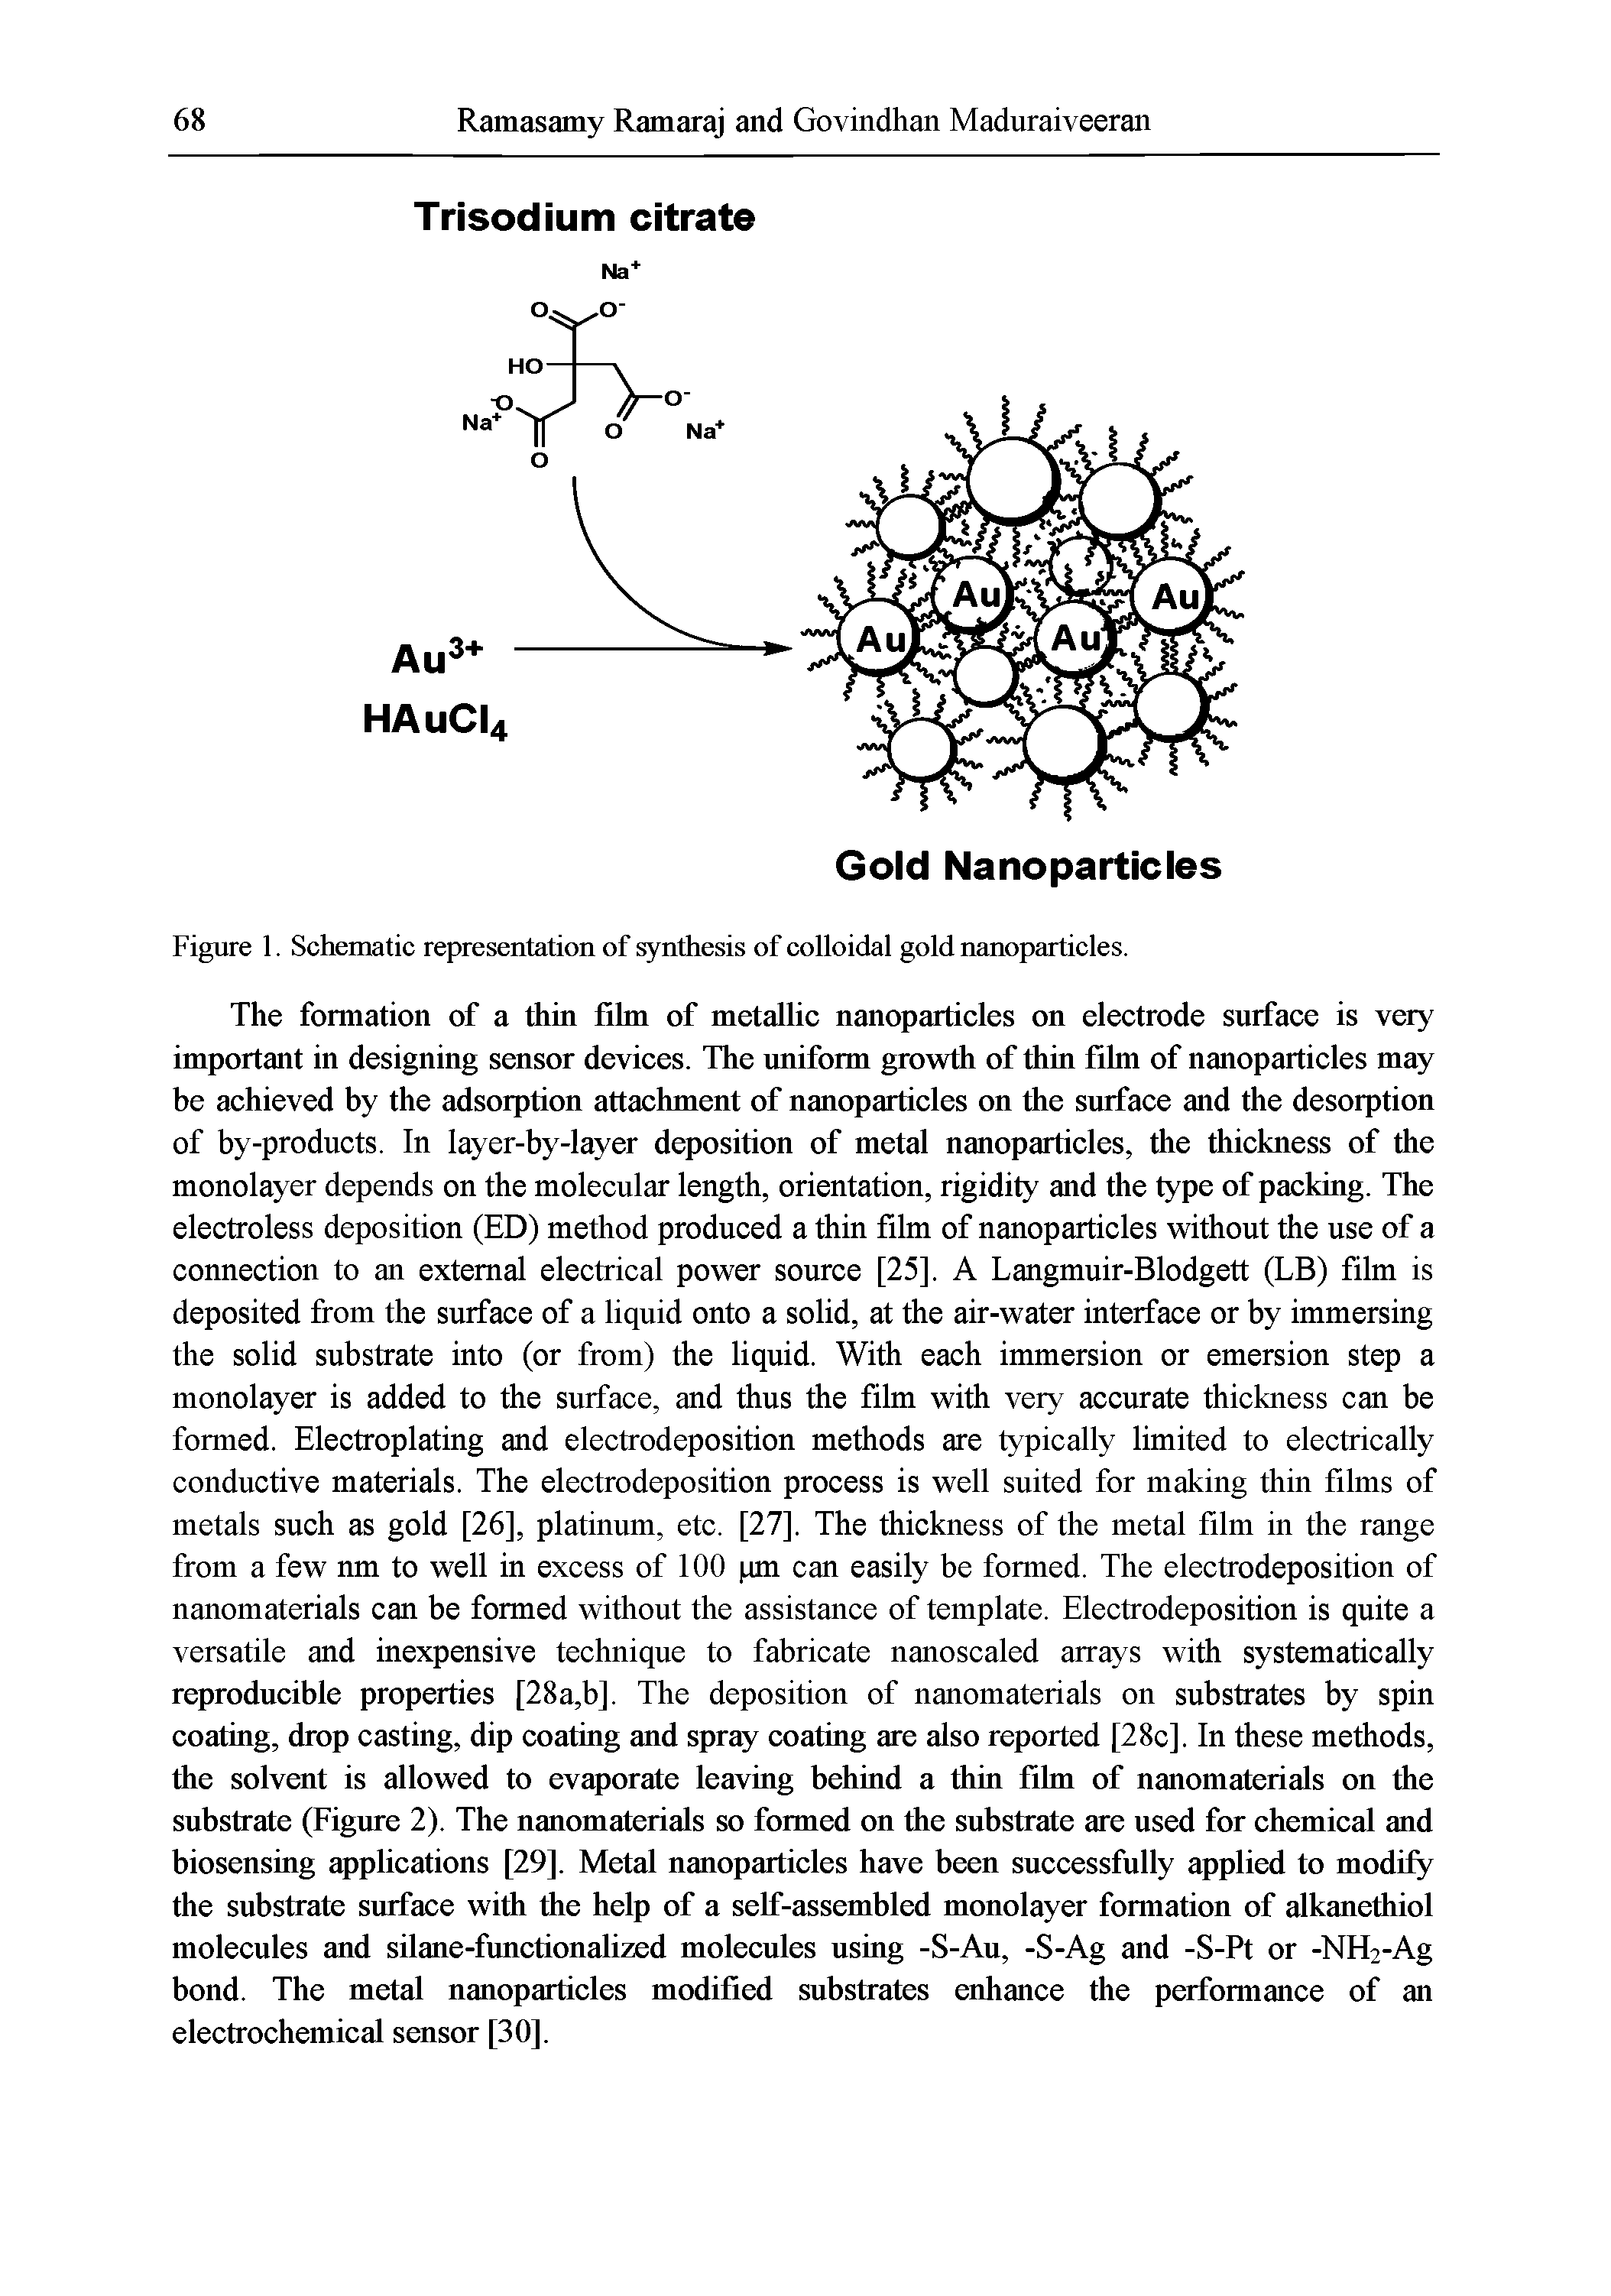 Figure 1. Schematic representation of synthesis of colloidal gold nanoparticles.